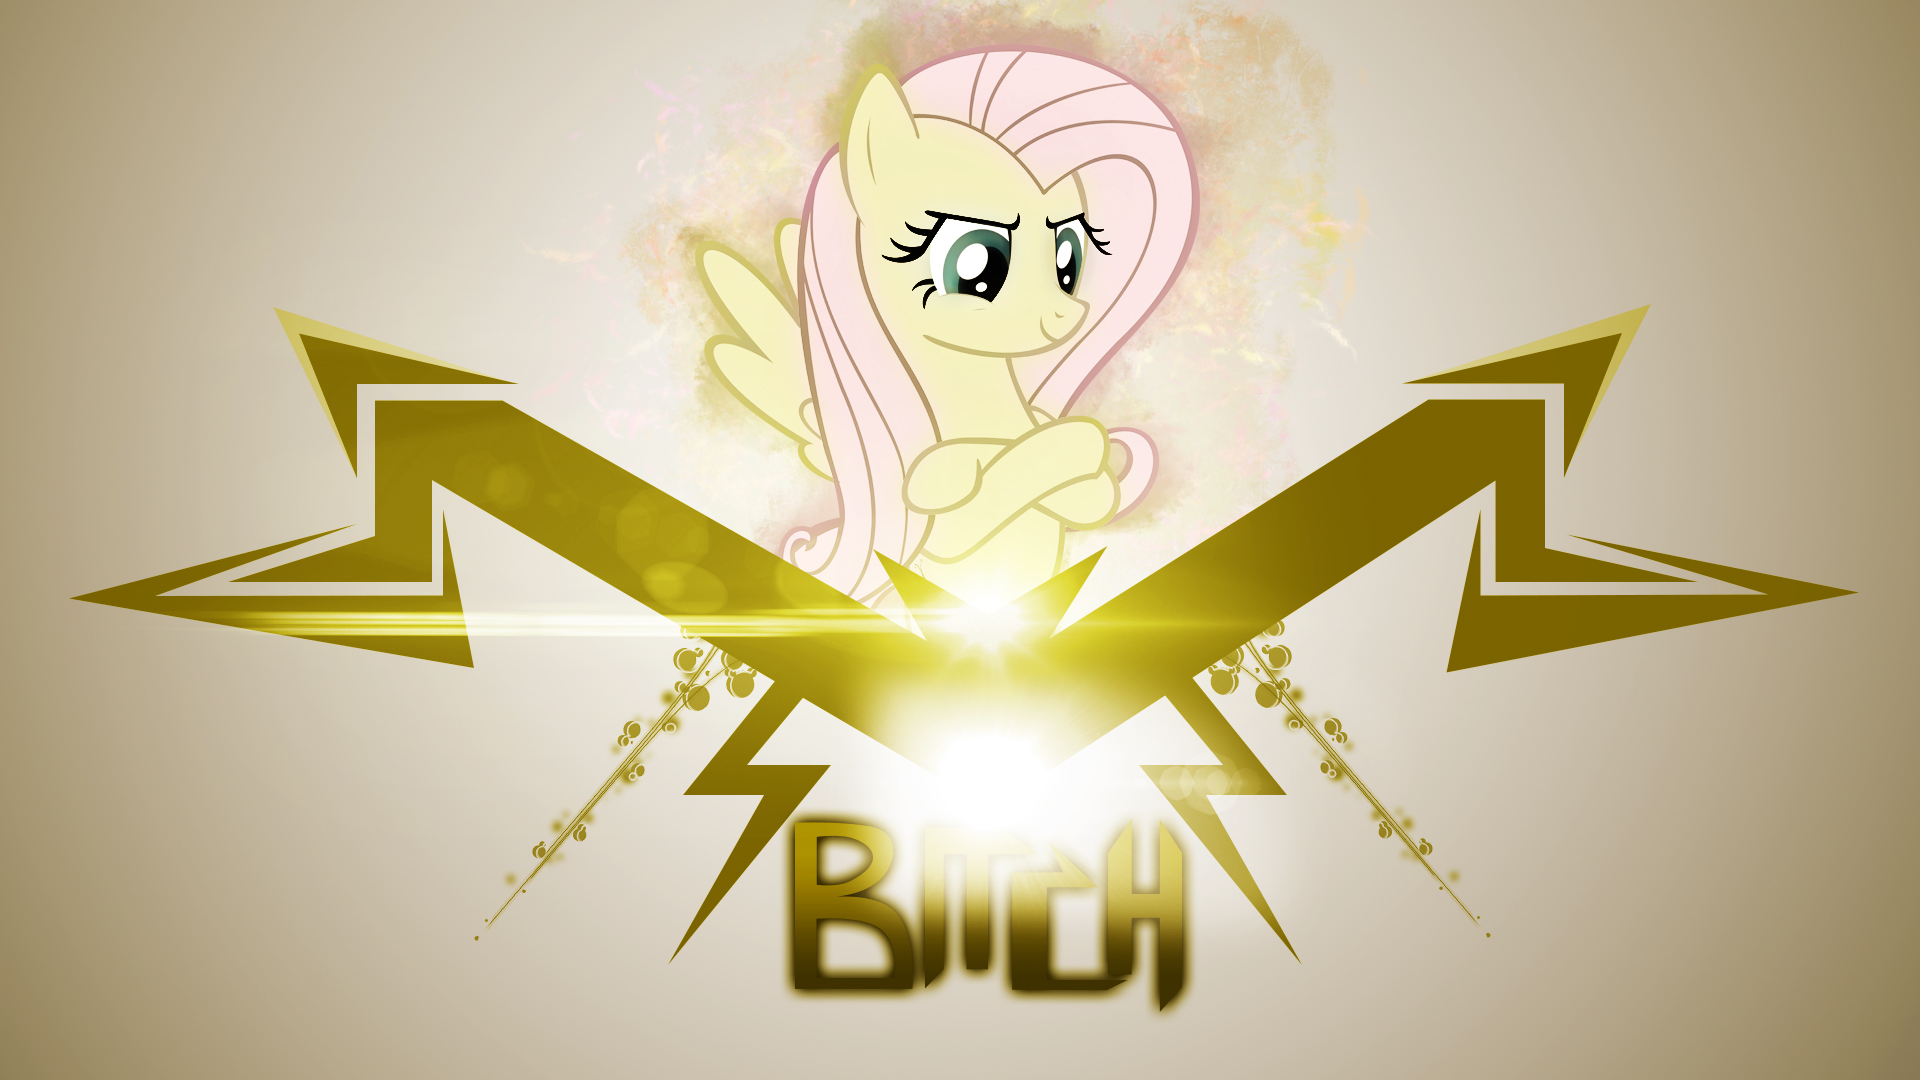 Bitch Like Fluttershy by Karl97 and ThatsGrotesque